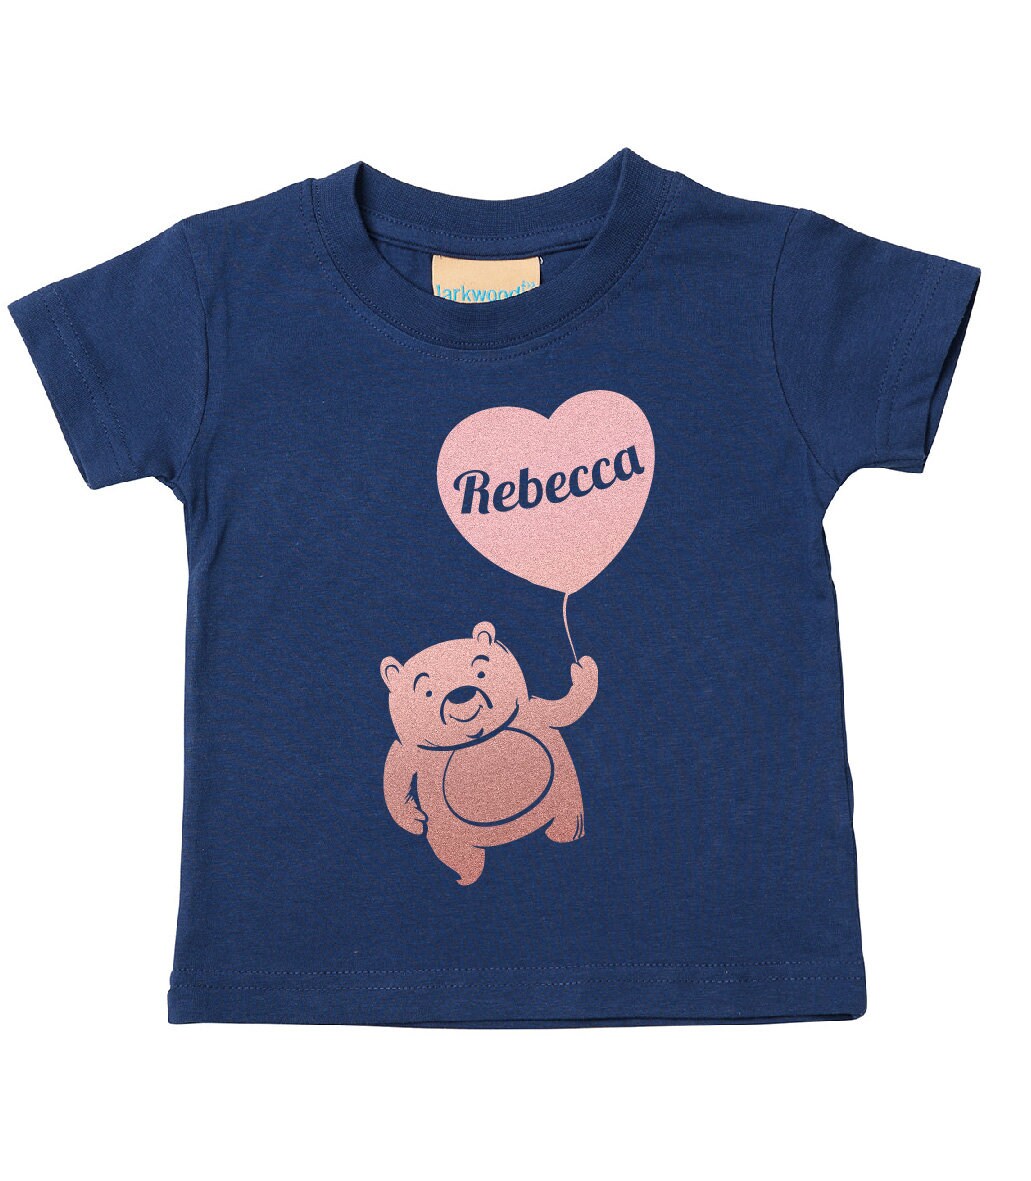 Personalised Rose Gold Print Teddy Bear with Balloon Kids T-Shirt | Personalised Kids Tshirt with Any Name | Heart T-shirt